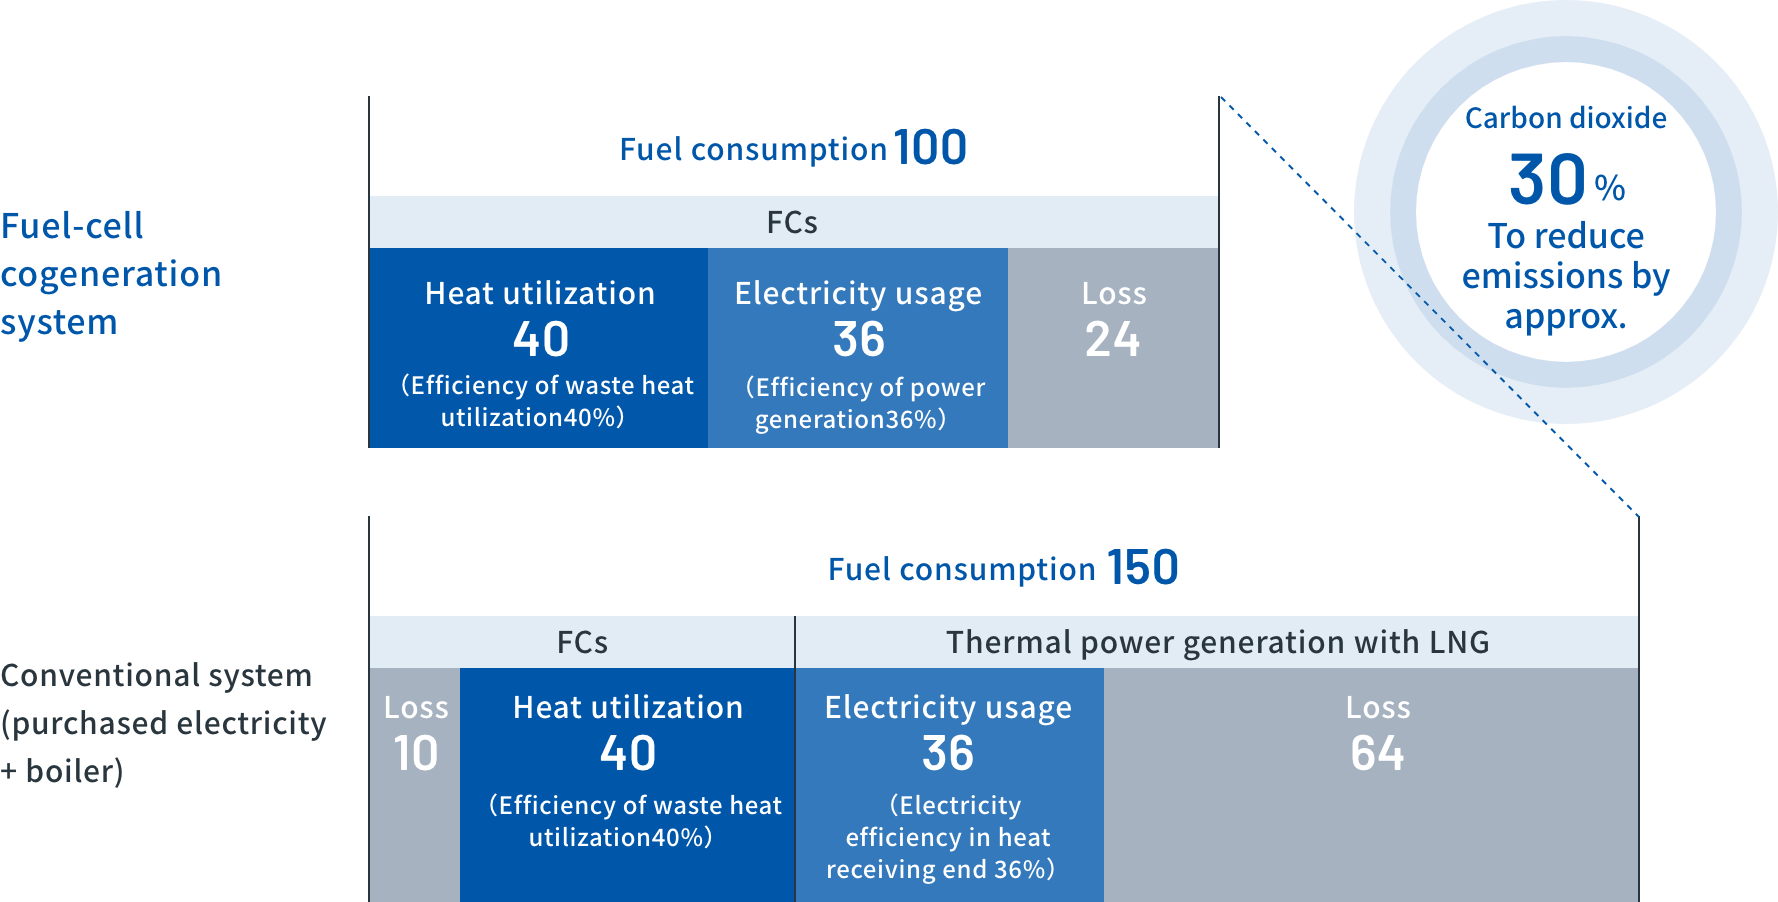 Comparison of conventional and fuel-cell cogeneration systems